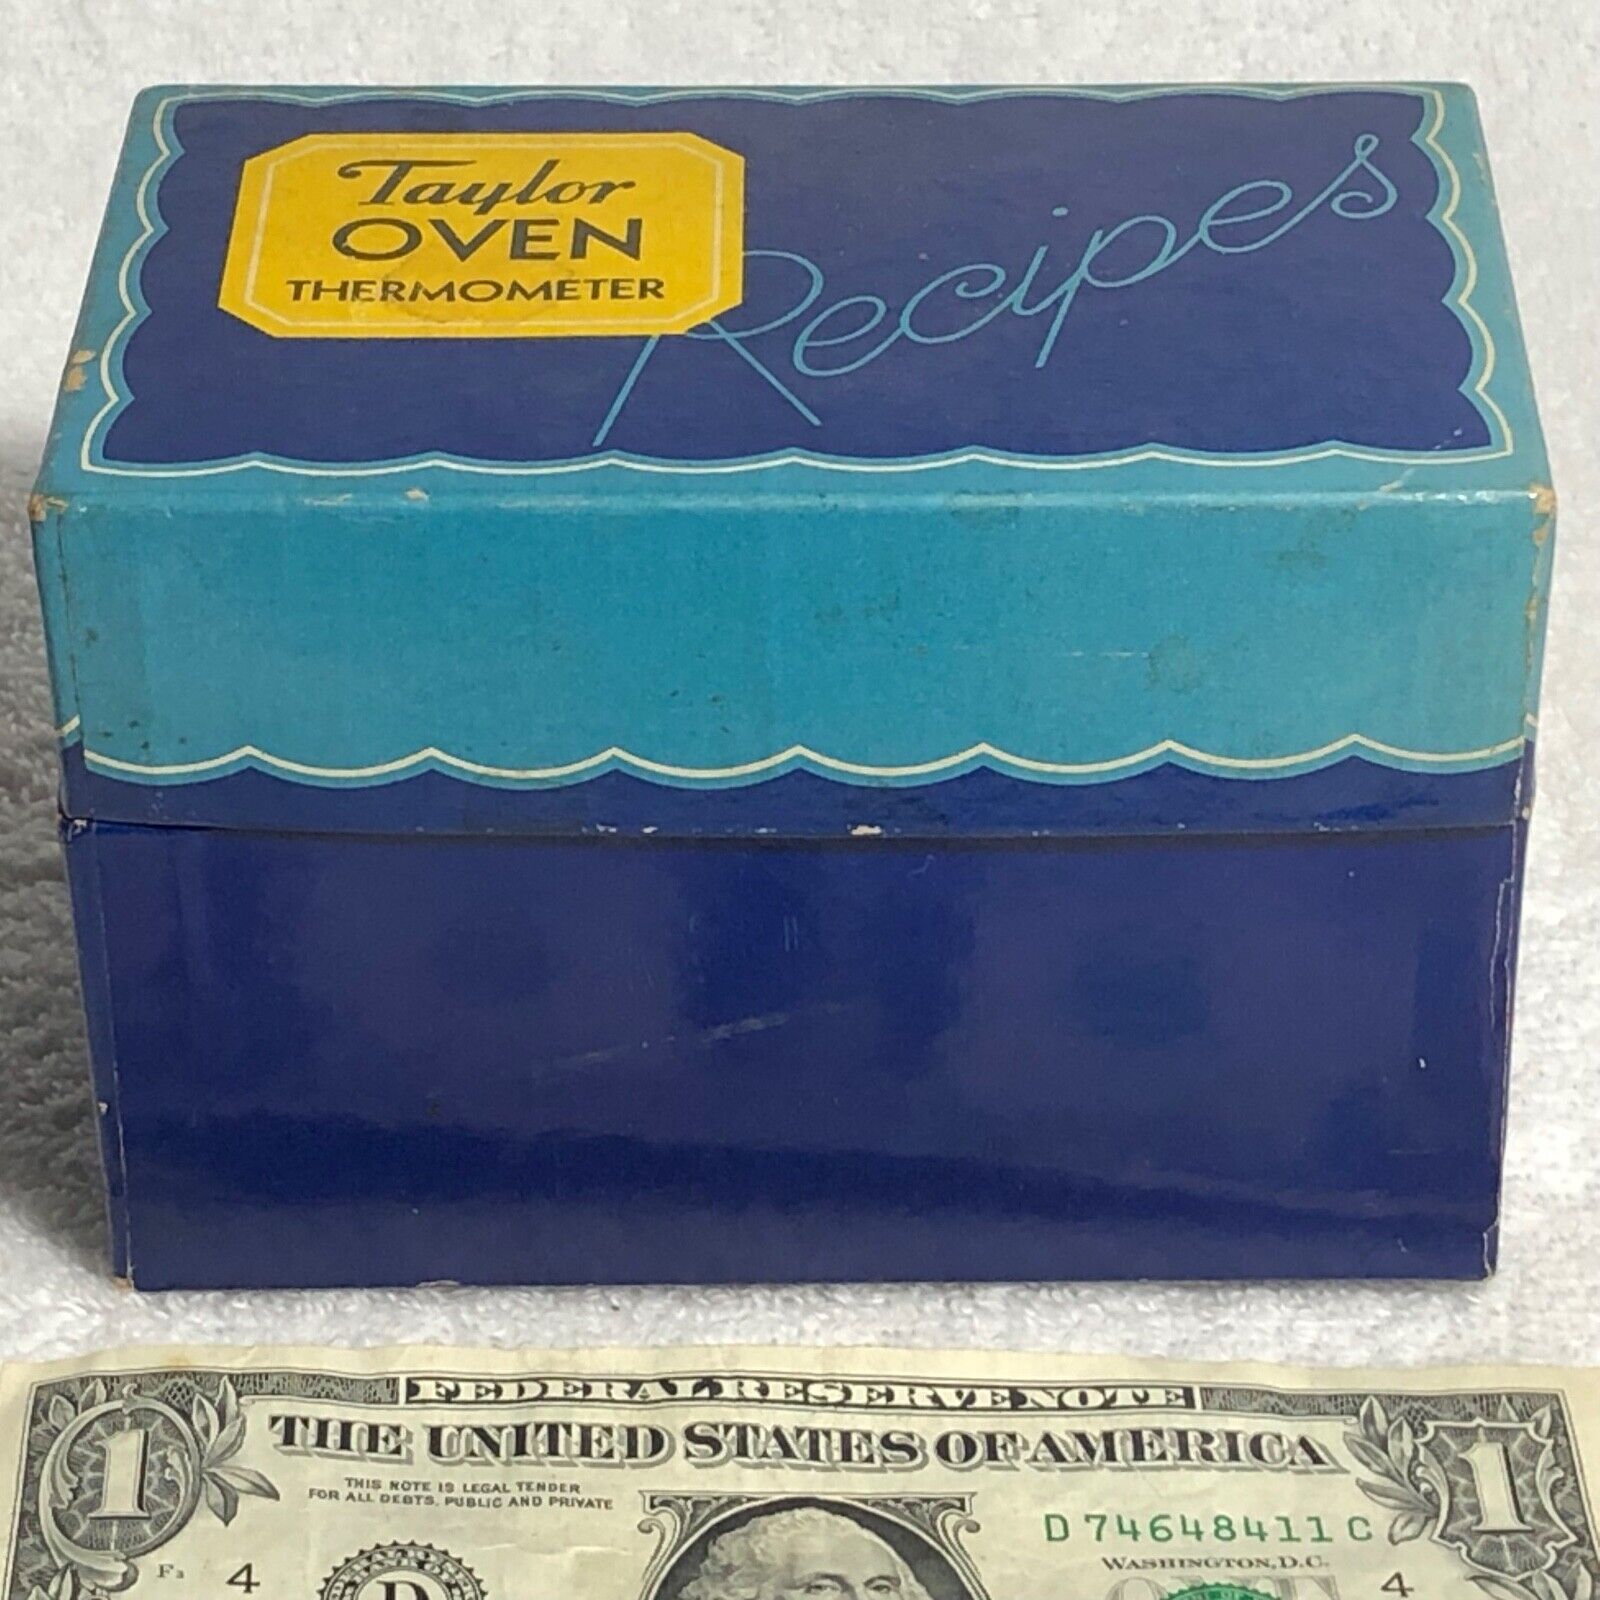 Rare 1934 Taylor Oven Thermometer Recipe Box Blue/Gold Kitchen Vintage BOX ONLY!